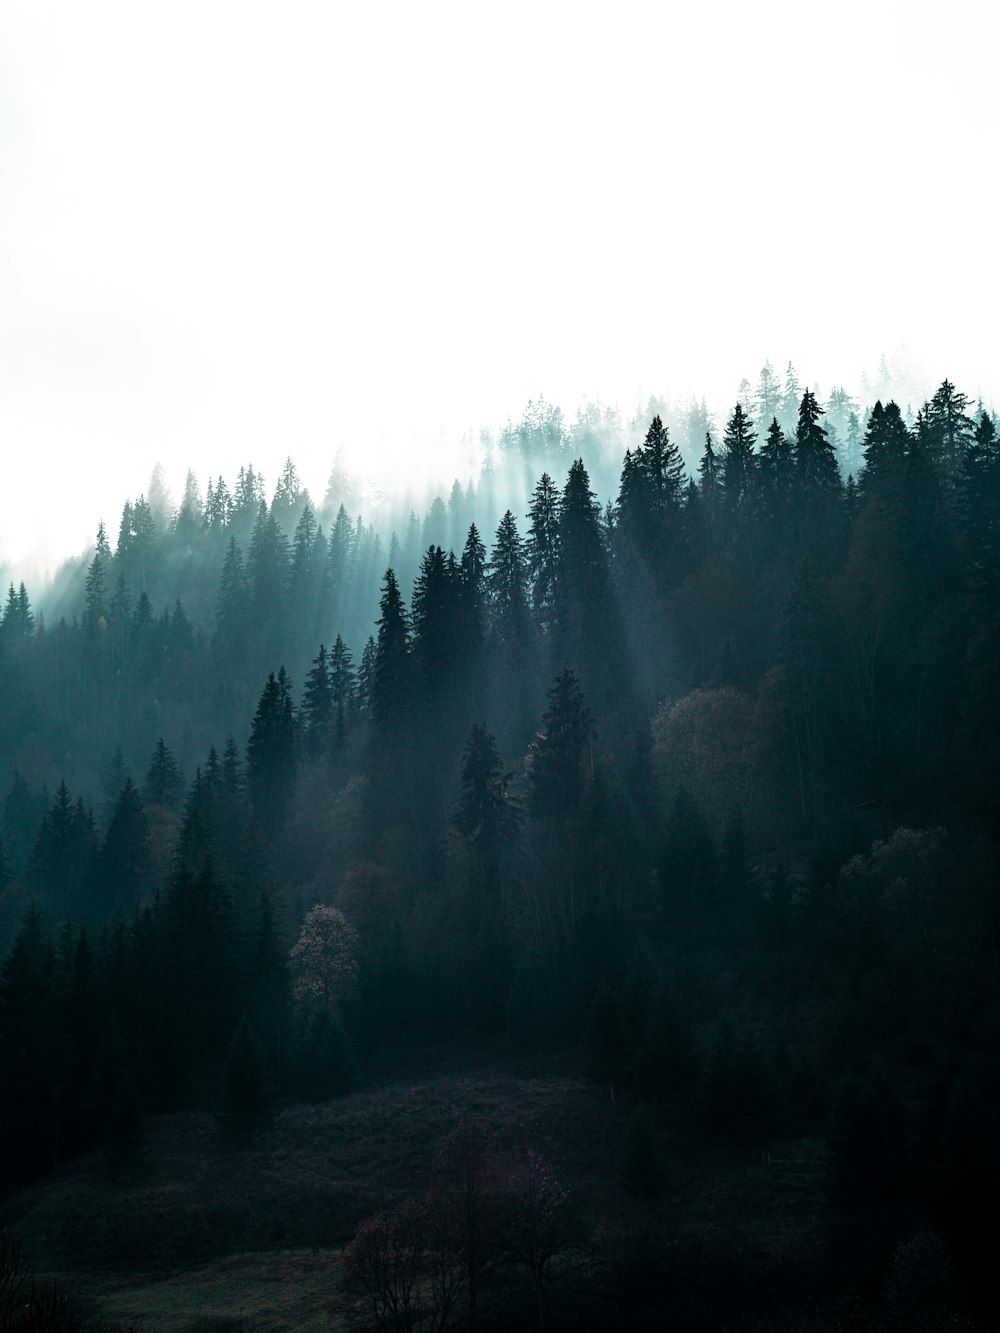 green pine trees with fog